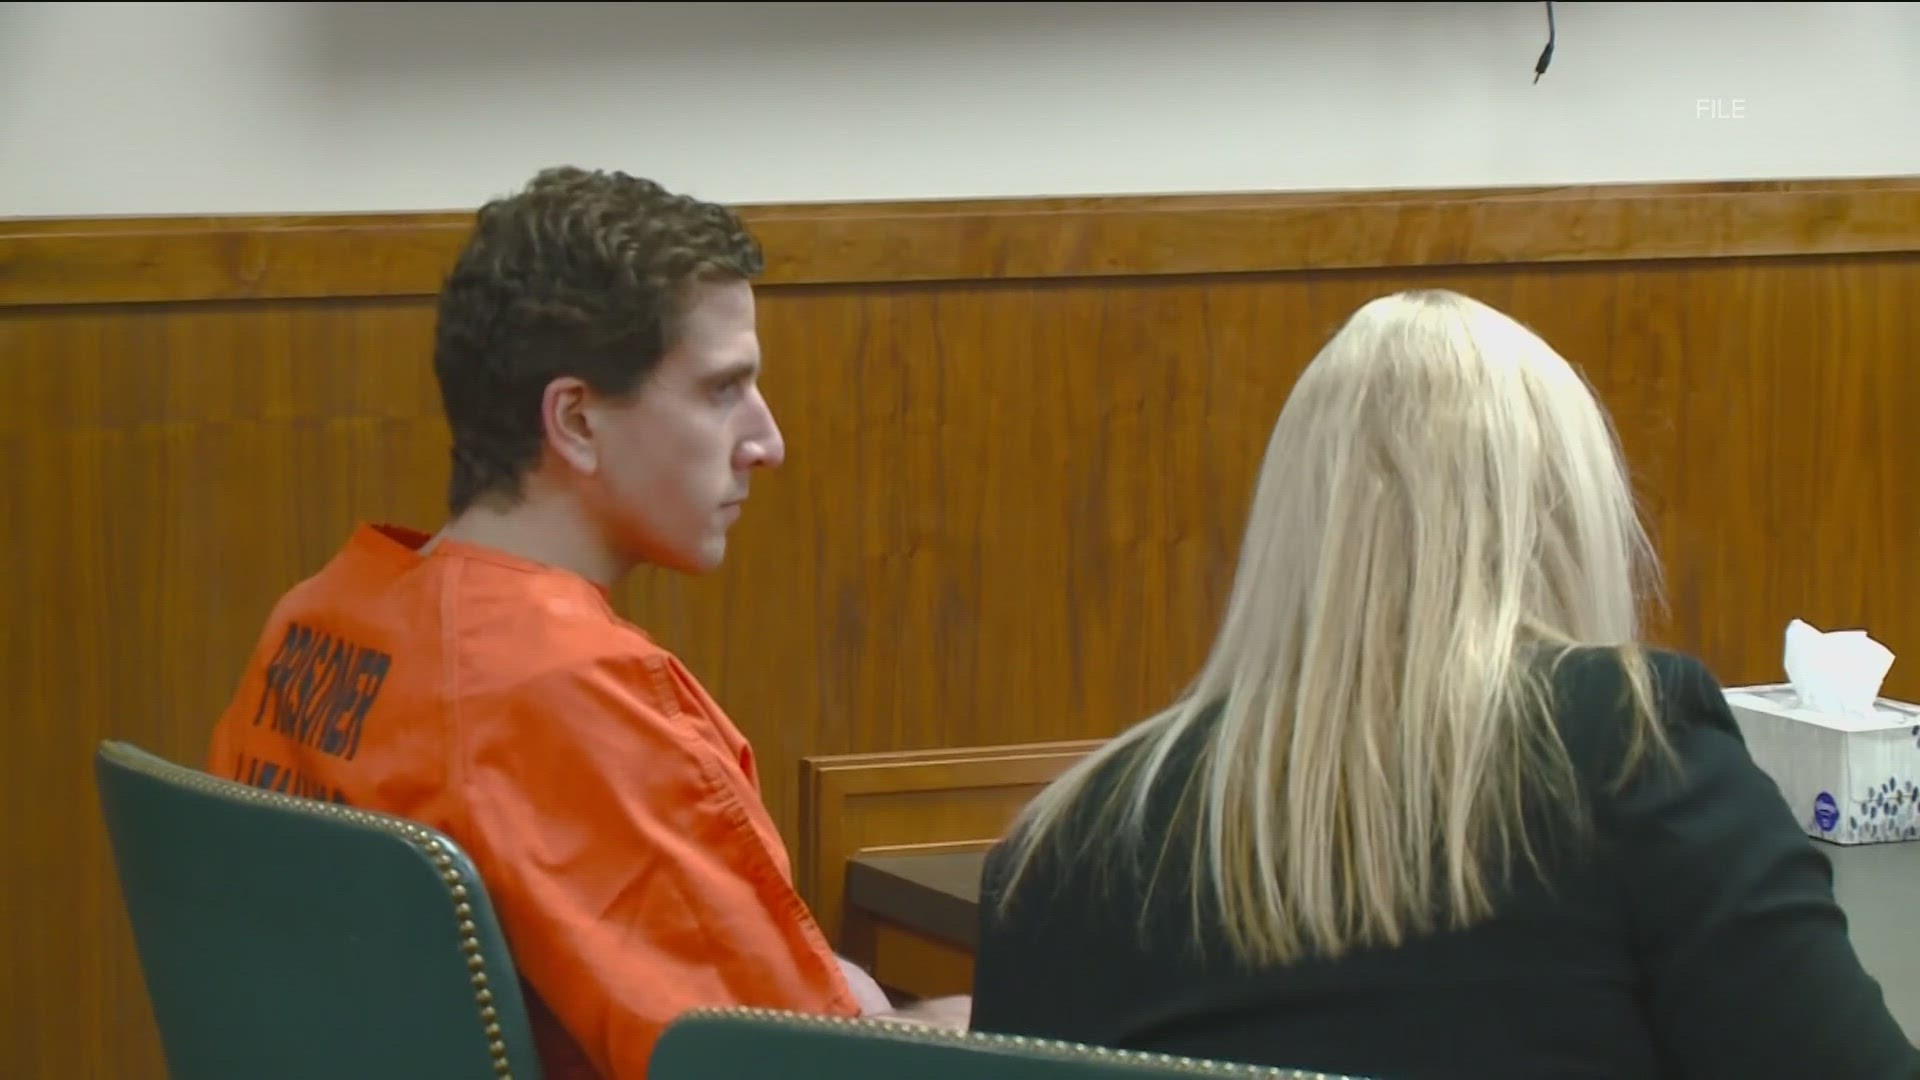 The brief says social media posts attempting to analyze Kohberger's body language is prejudicial to the case.